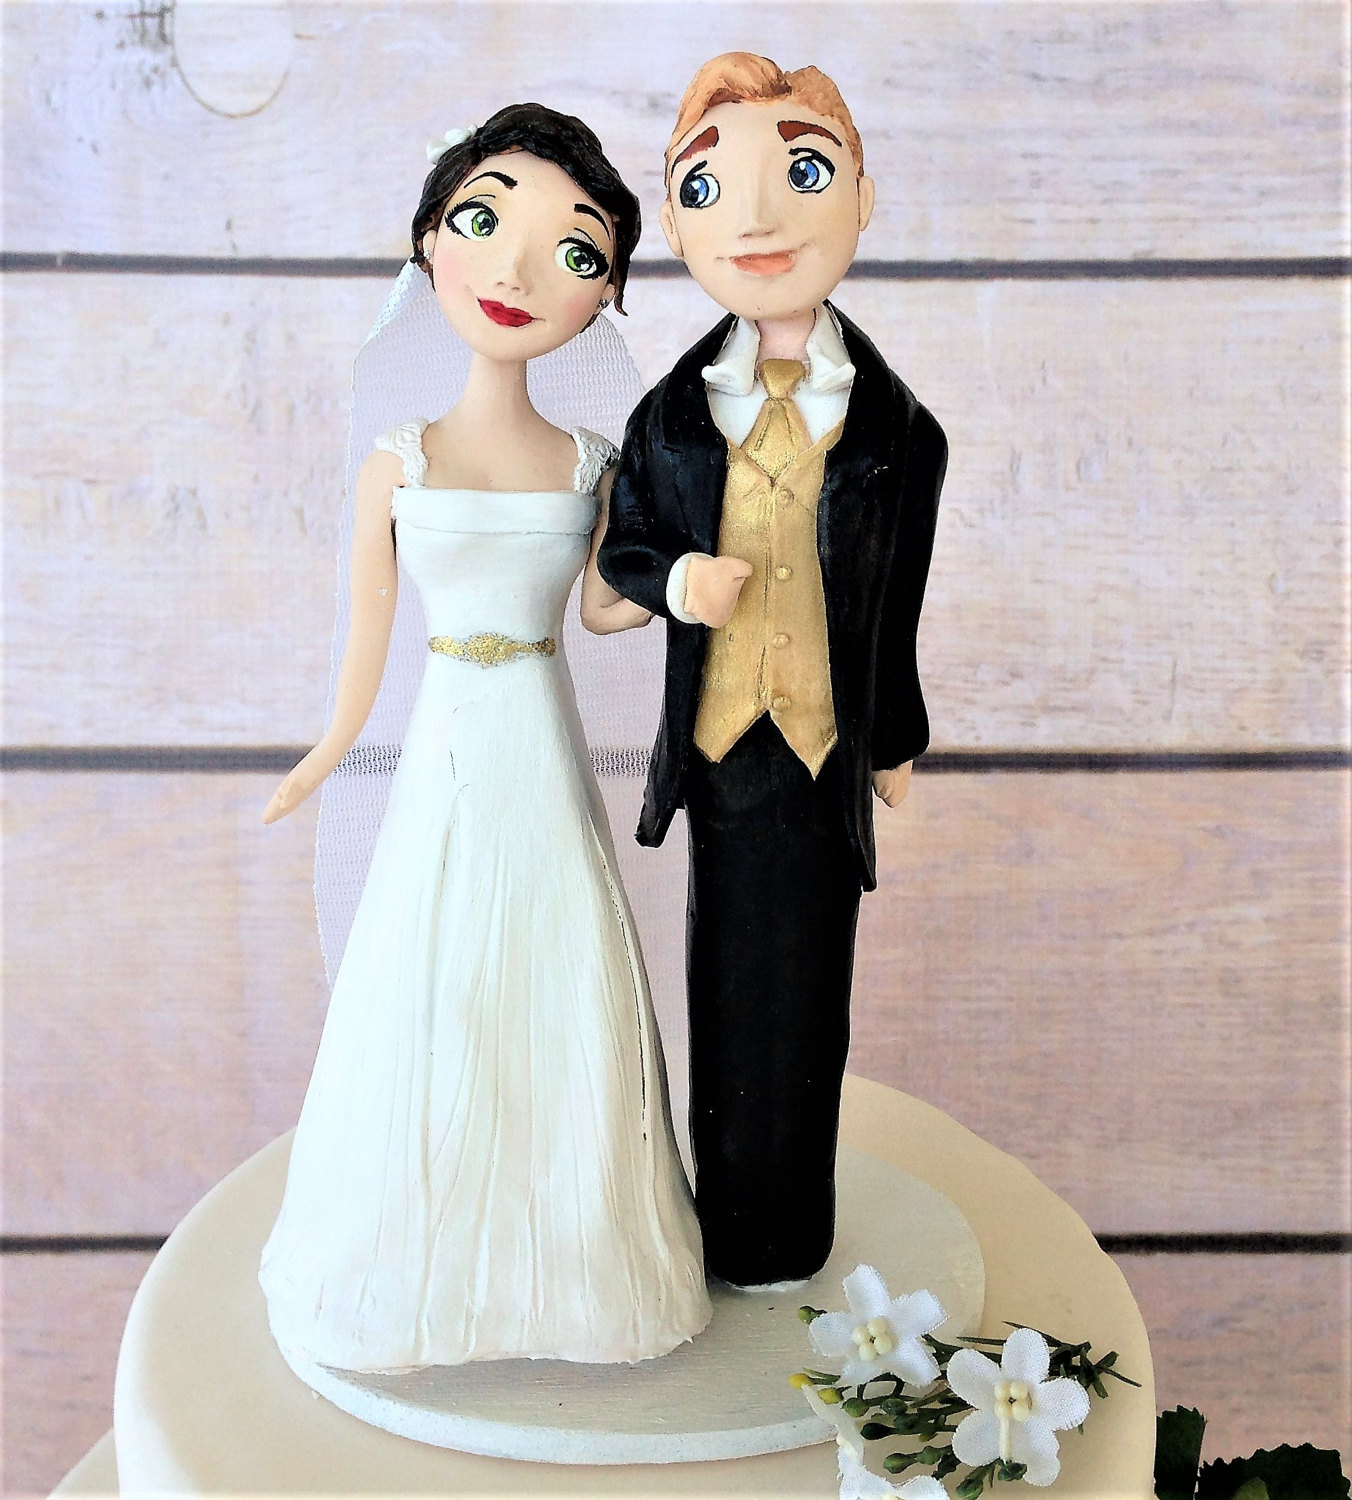 clay figurine wedding cake toppers